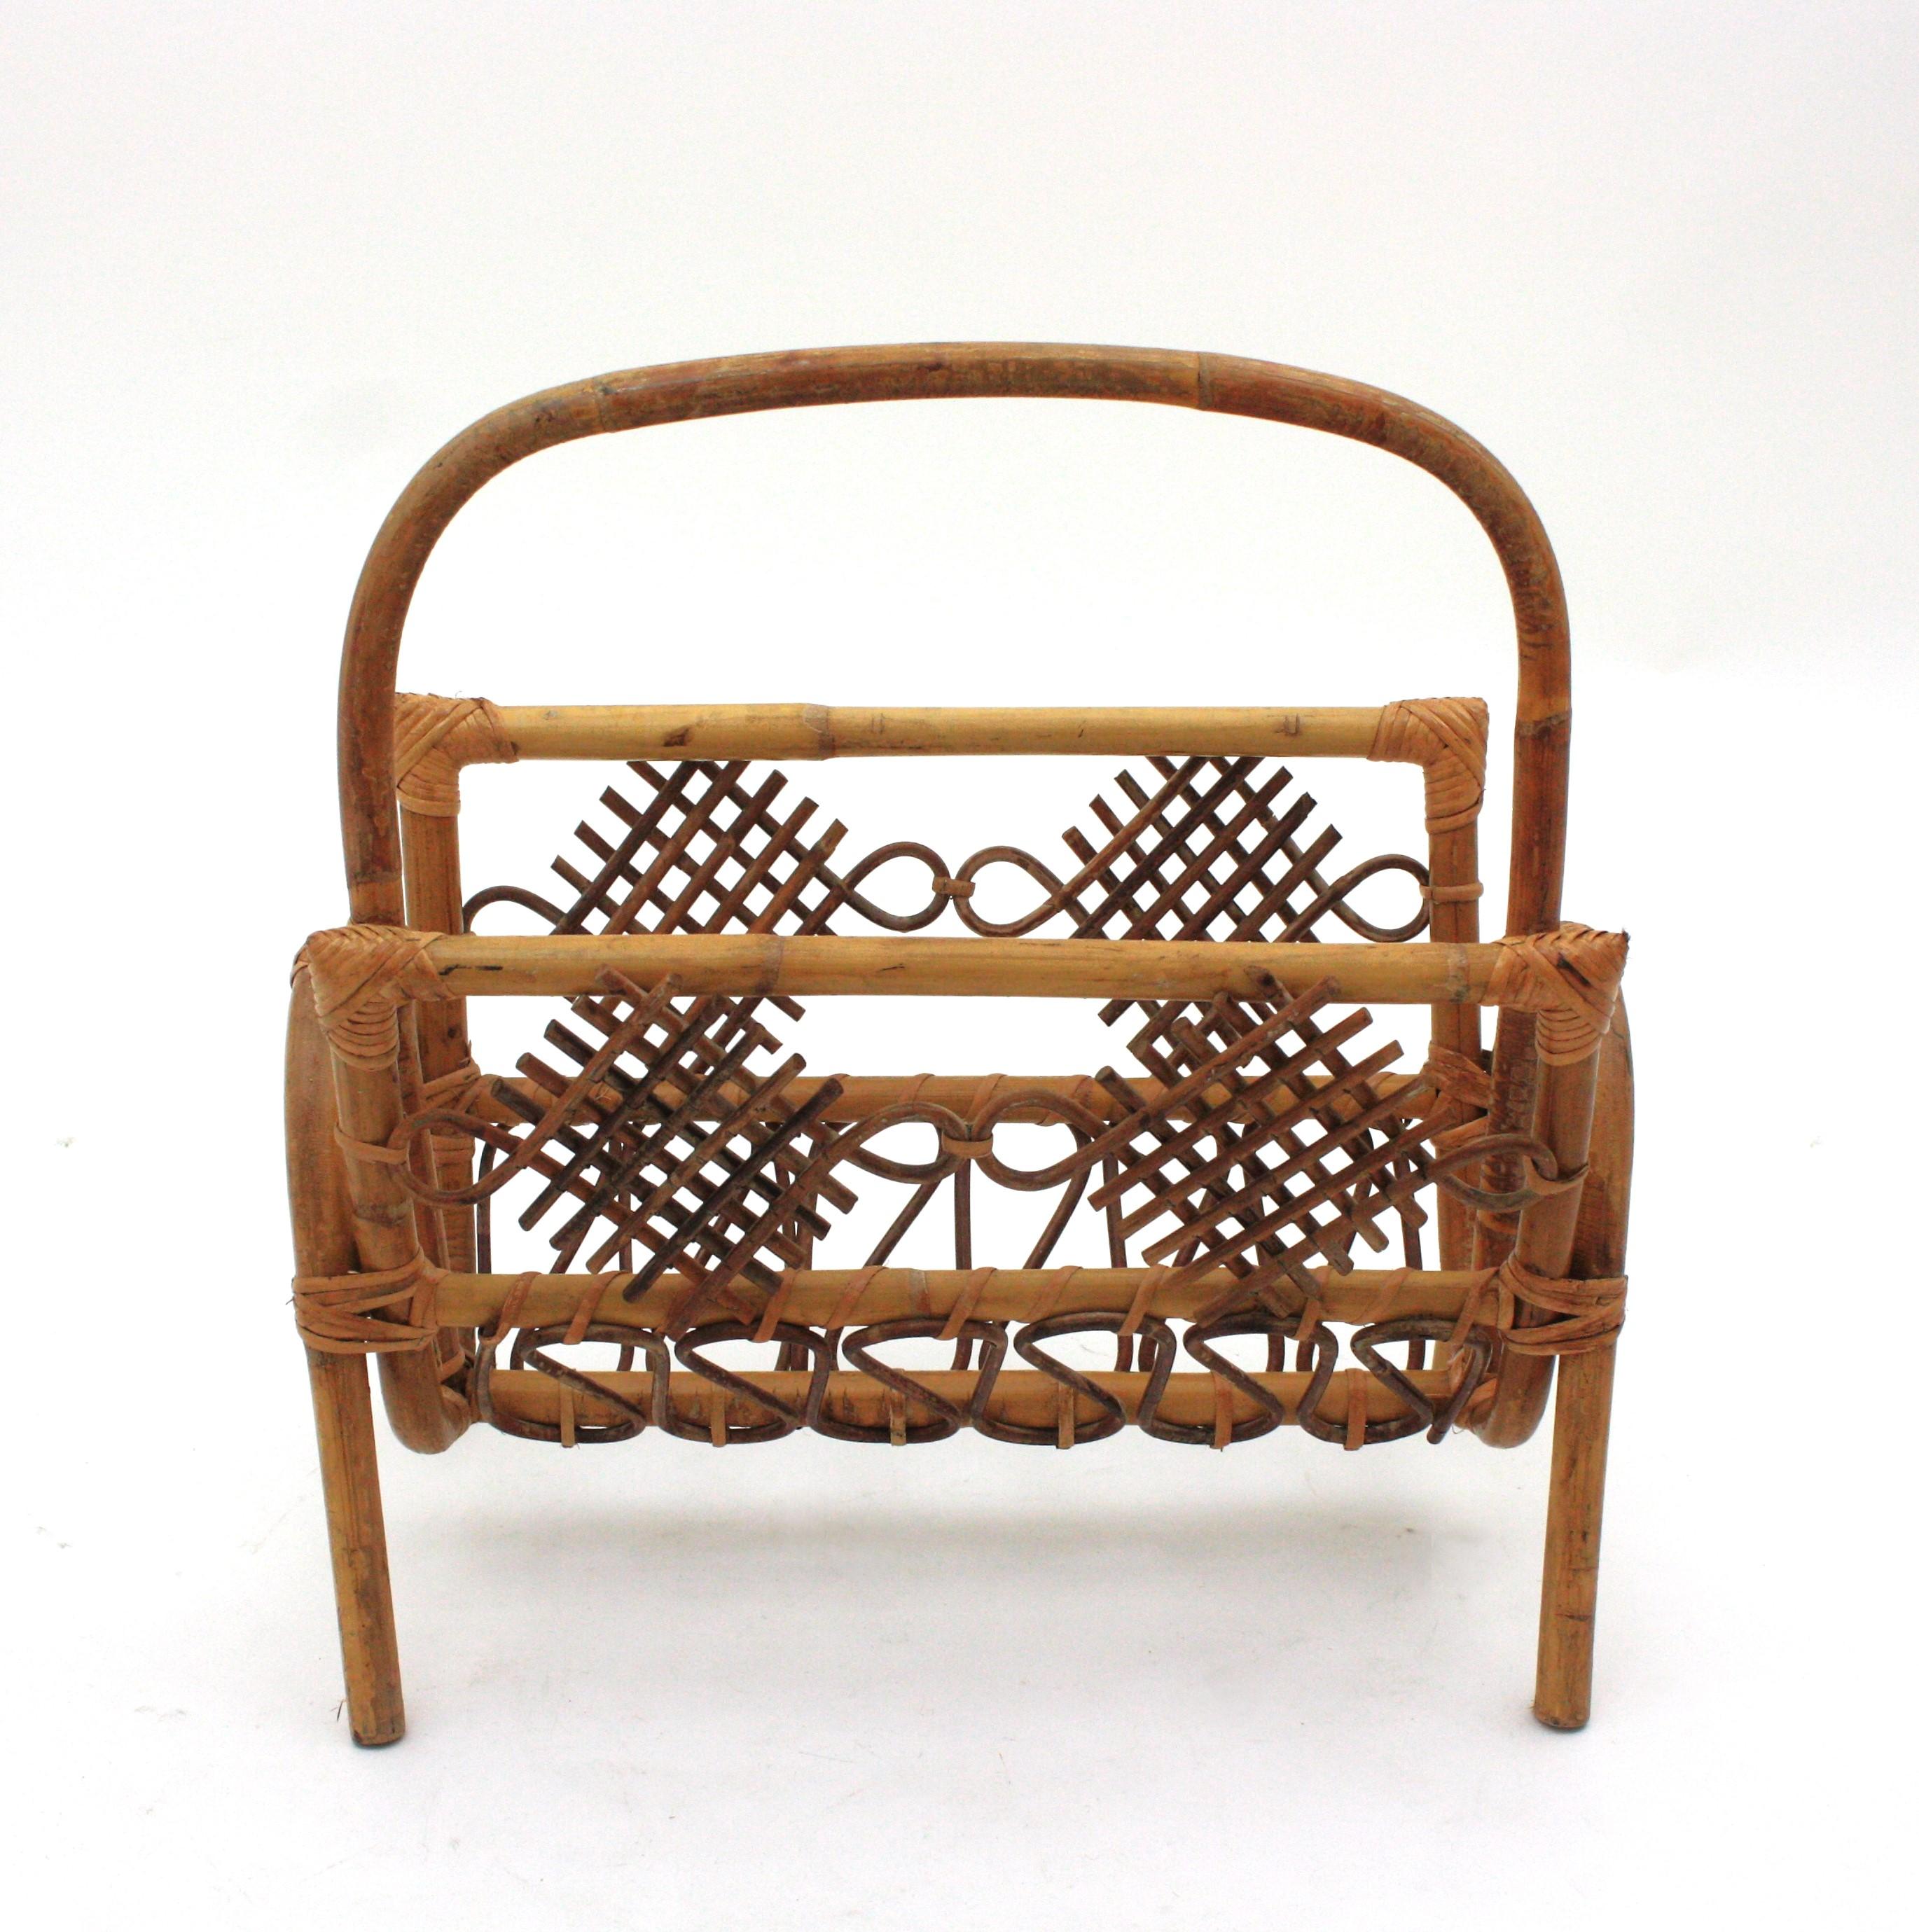 Eye-catching bamboo and rattan magazine rack,  France, 1950s-1960s
This magazine stand features a bamboo basket with loop and chinoiserie rattan decorations.
It has all the taste of the French Riviera style.
Use it as magazine rack or as blanket